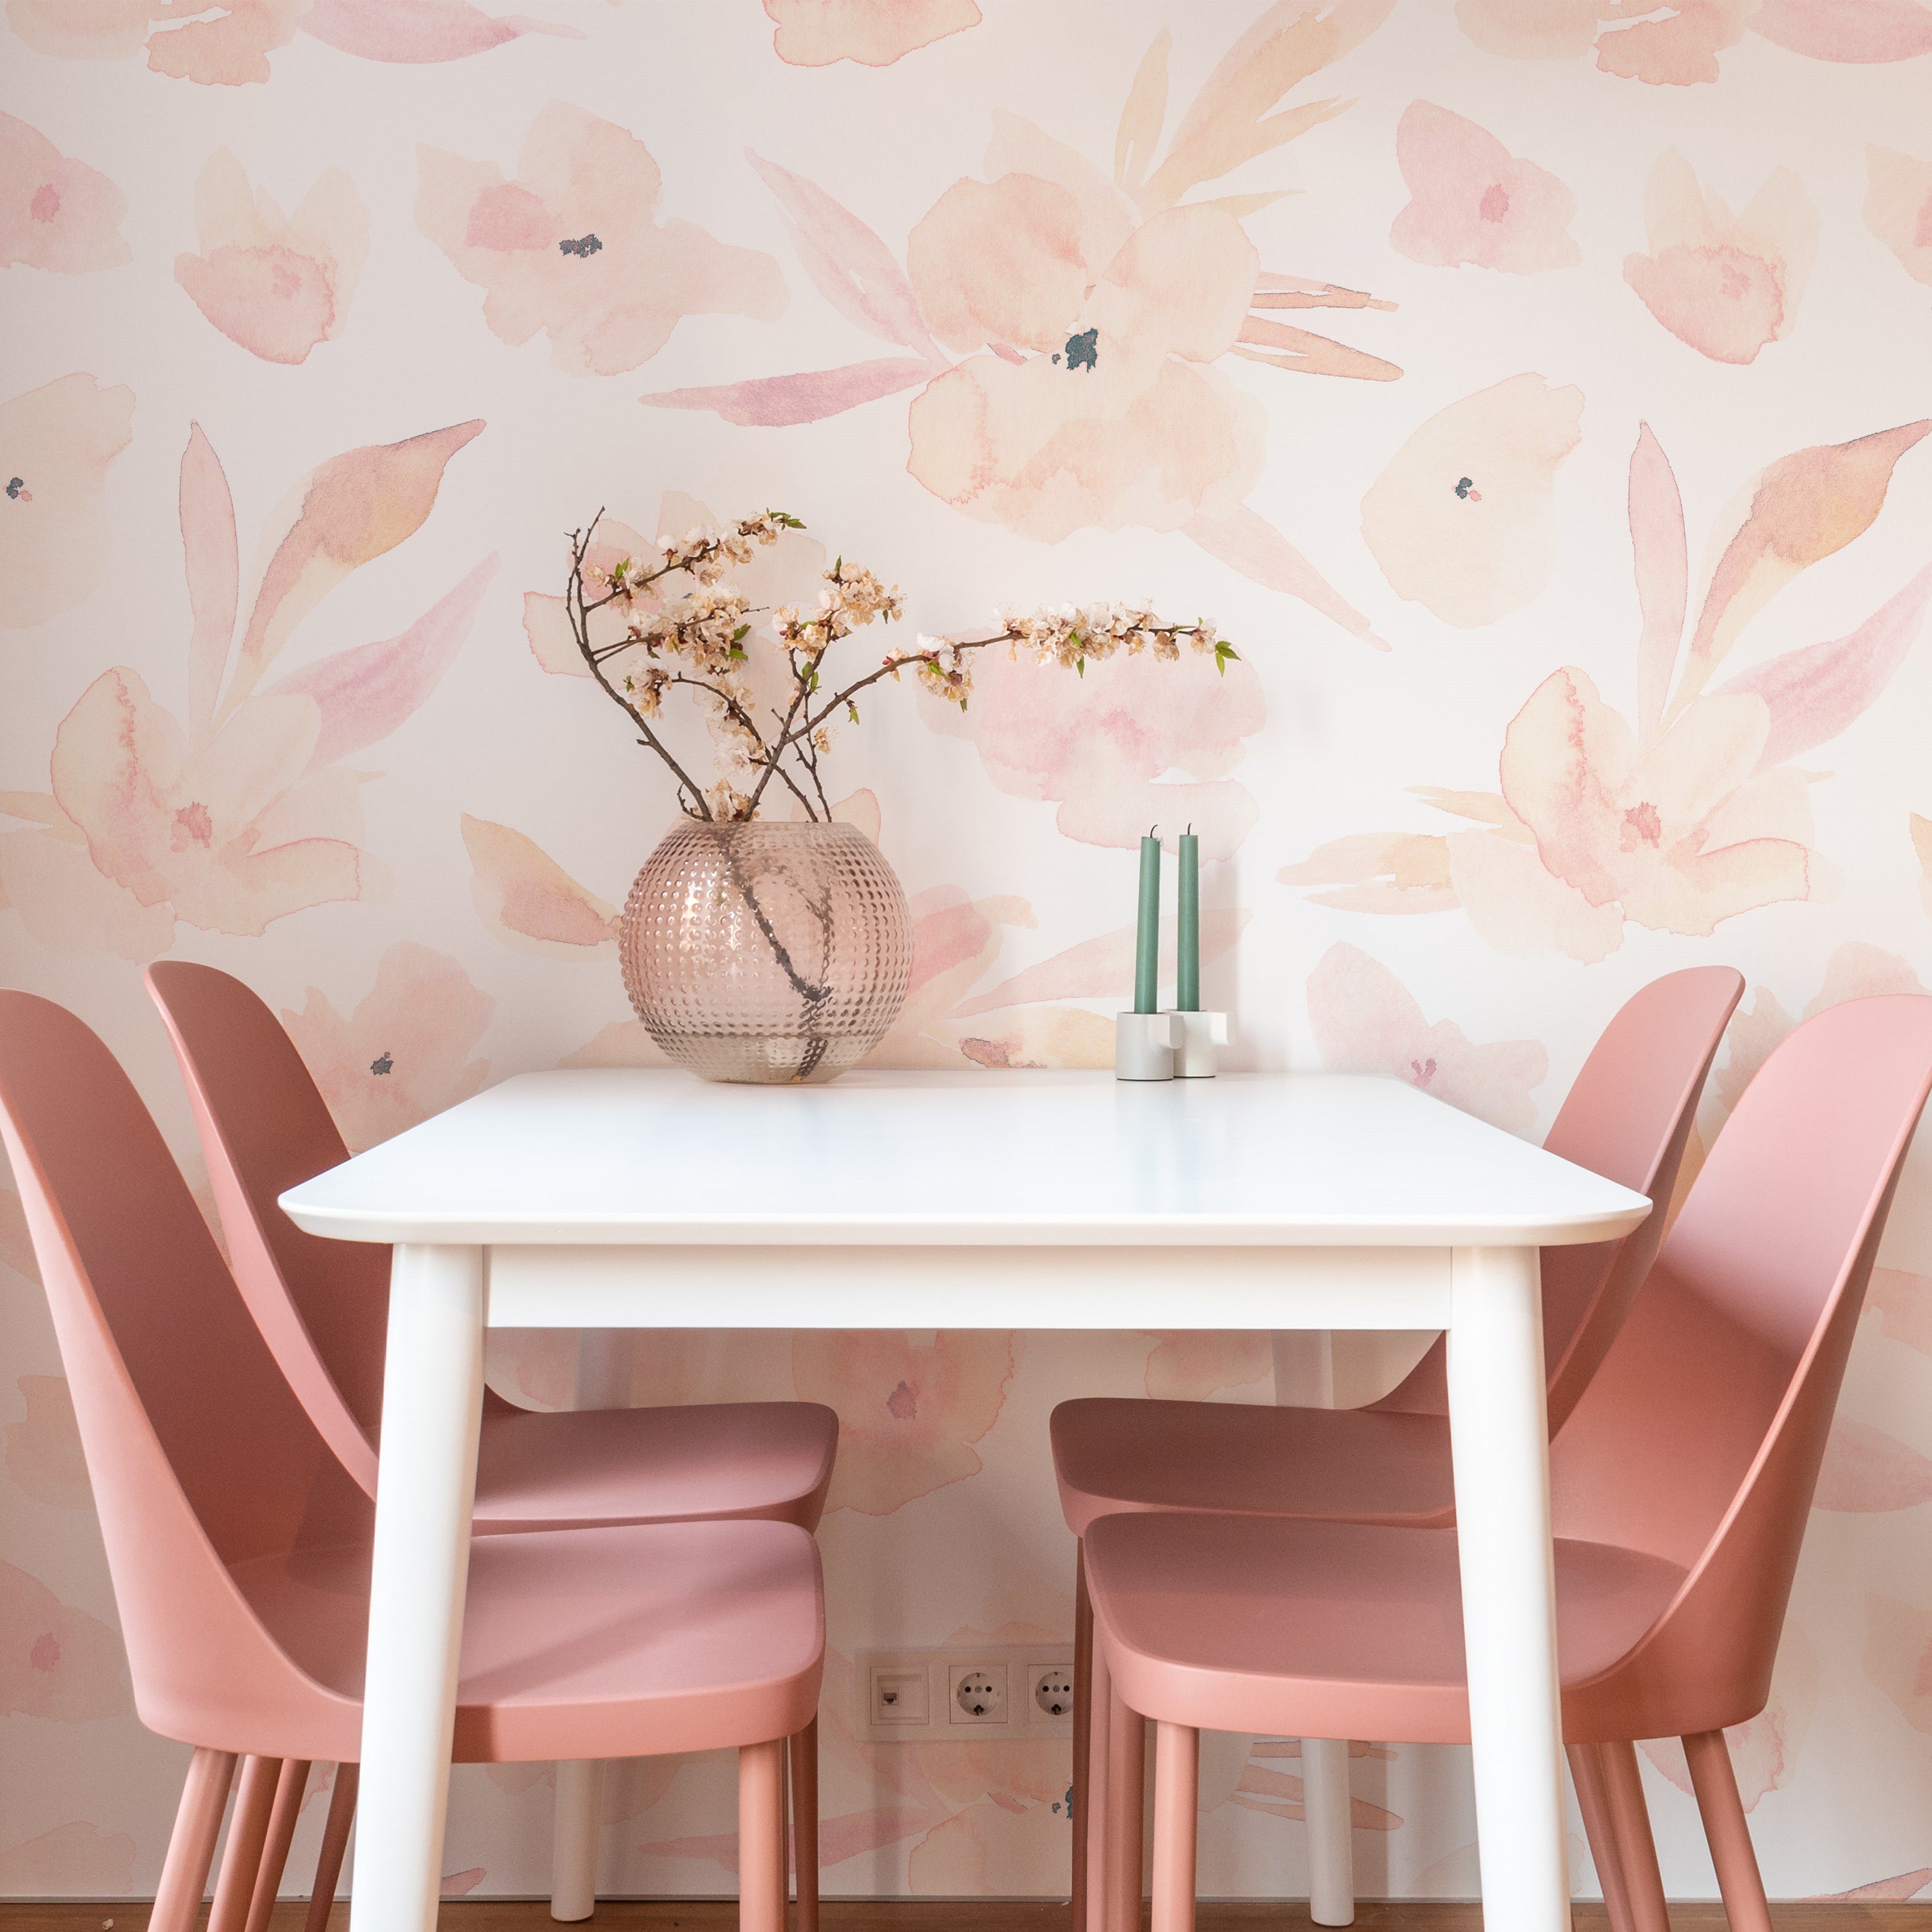 A bright and airy dining area featuring a white table and soft pink chairs, complemented by the subtle elegance of the Florelegance Wallpaper, which boasts large watercolor flowers in shades of pale pink and cream, creating a serene backdrop